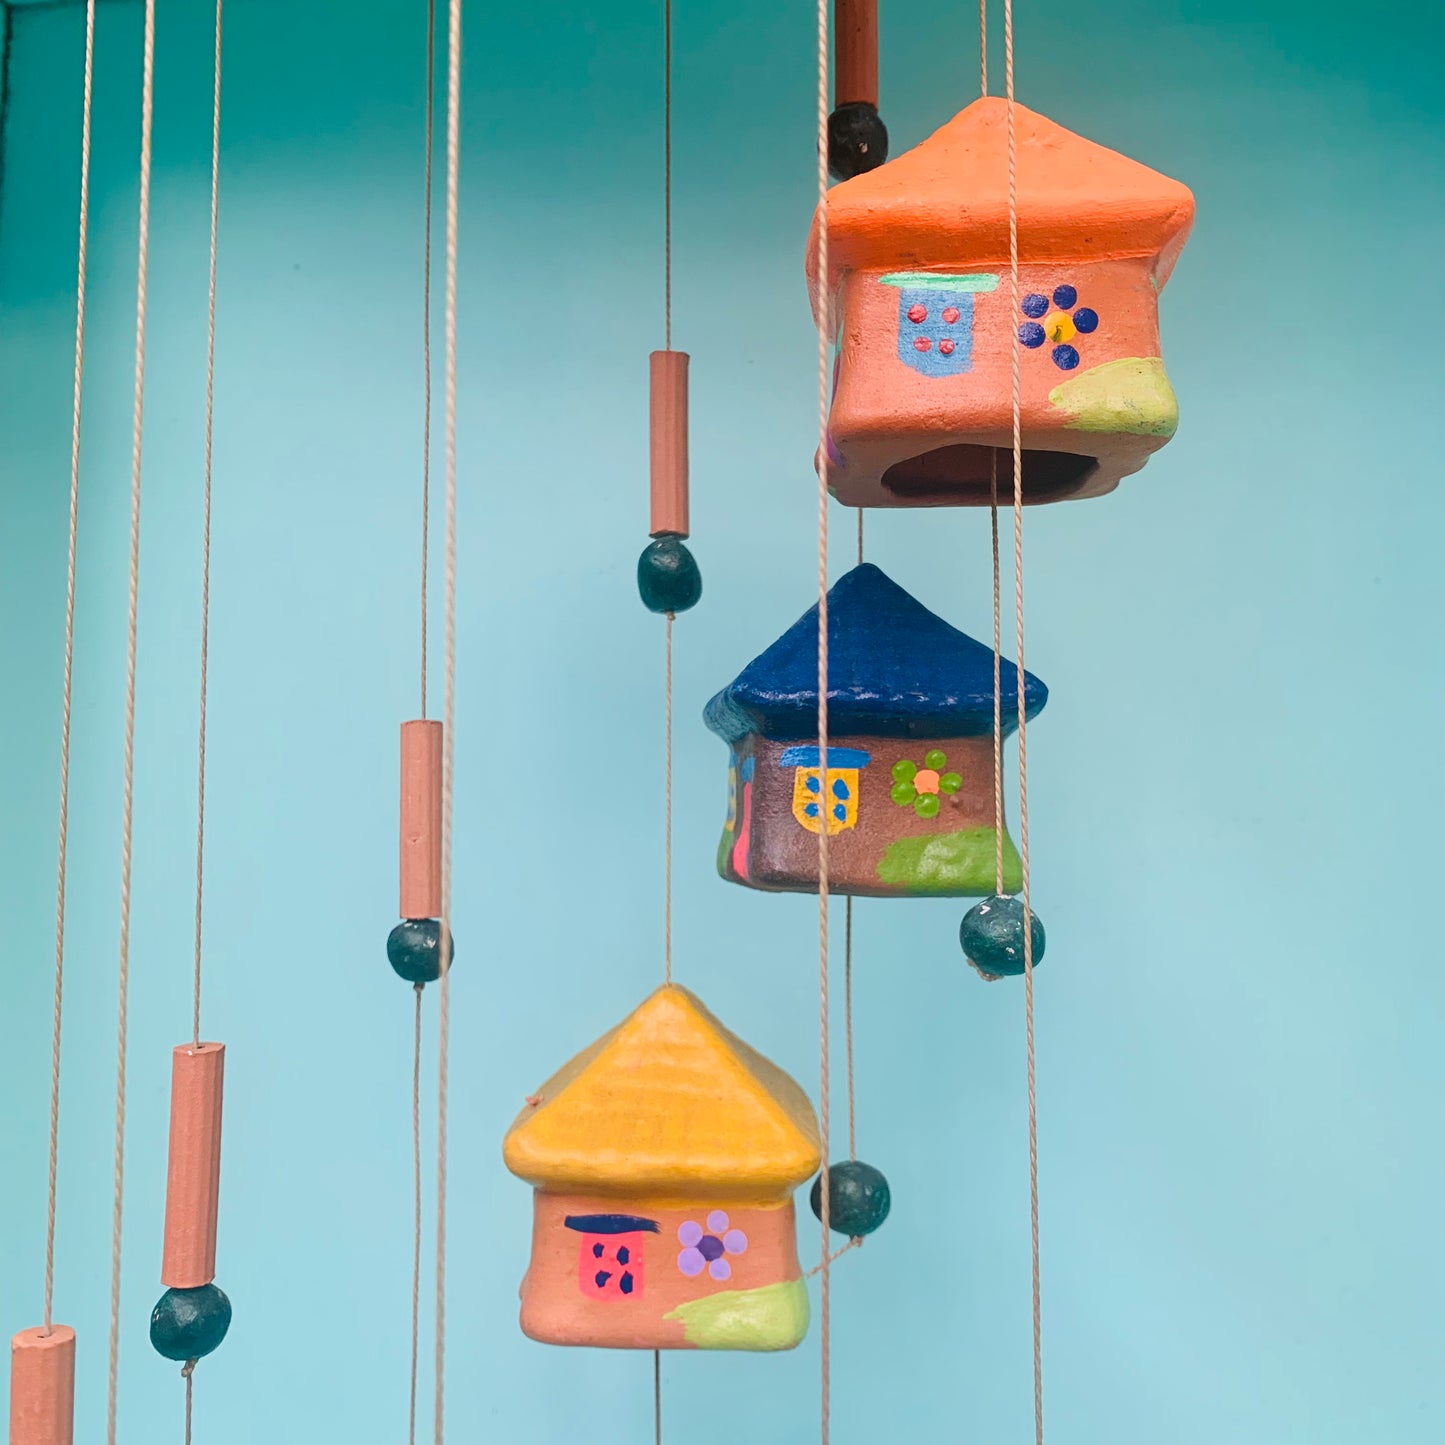 Terracotta  wind chime houses painted